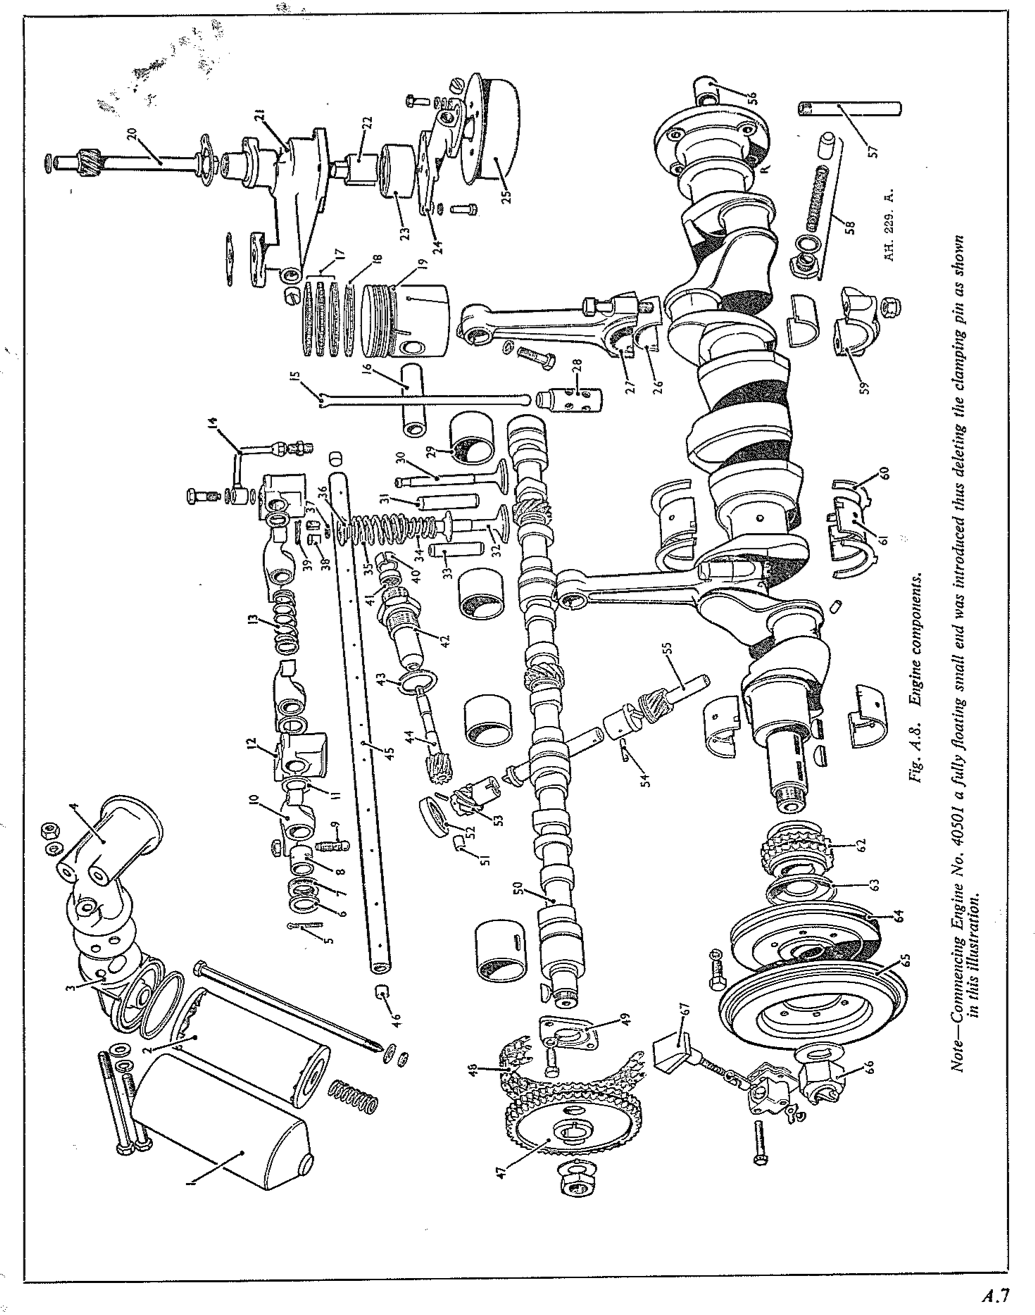 Fig A.8. Engine components.